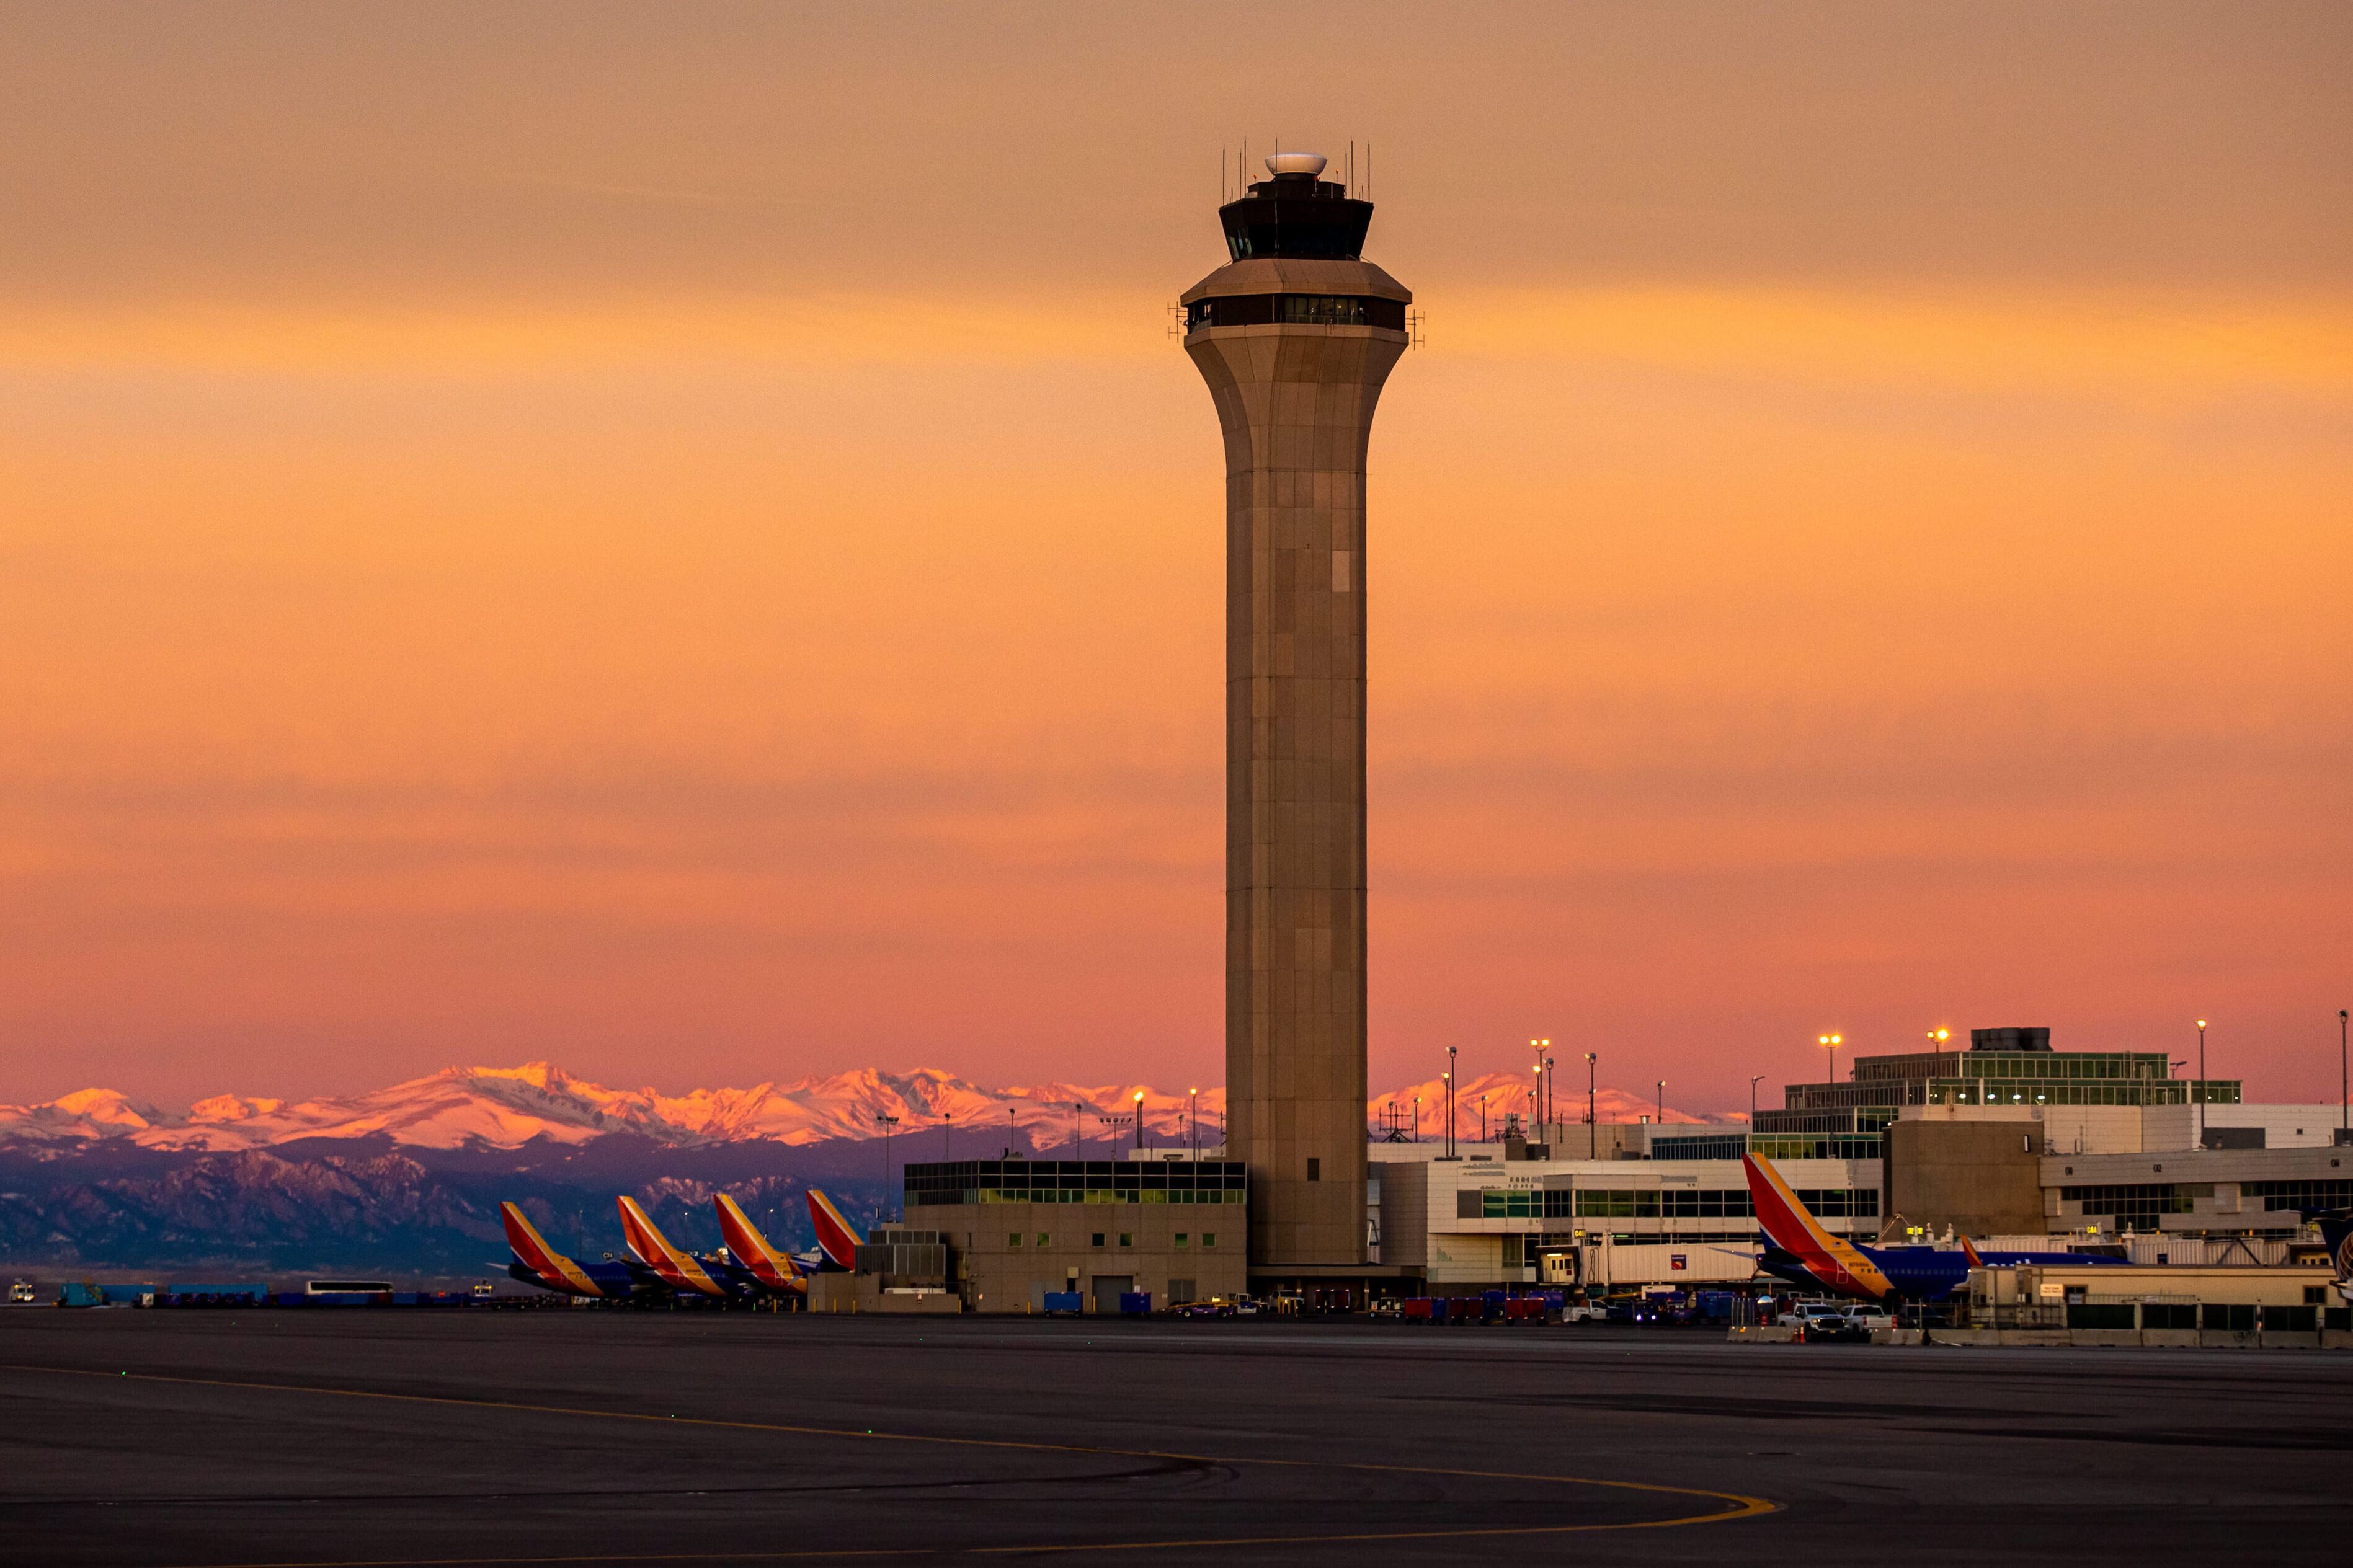 An ATC tower and several Southwest Airlines aircraft at Denver International Airport during sunrise.